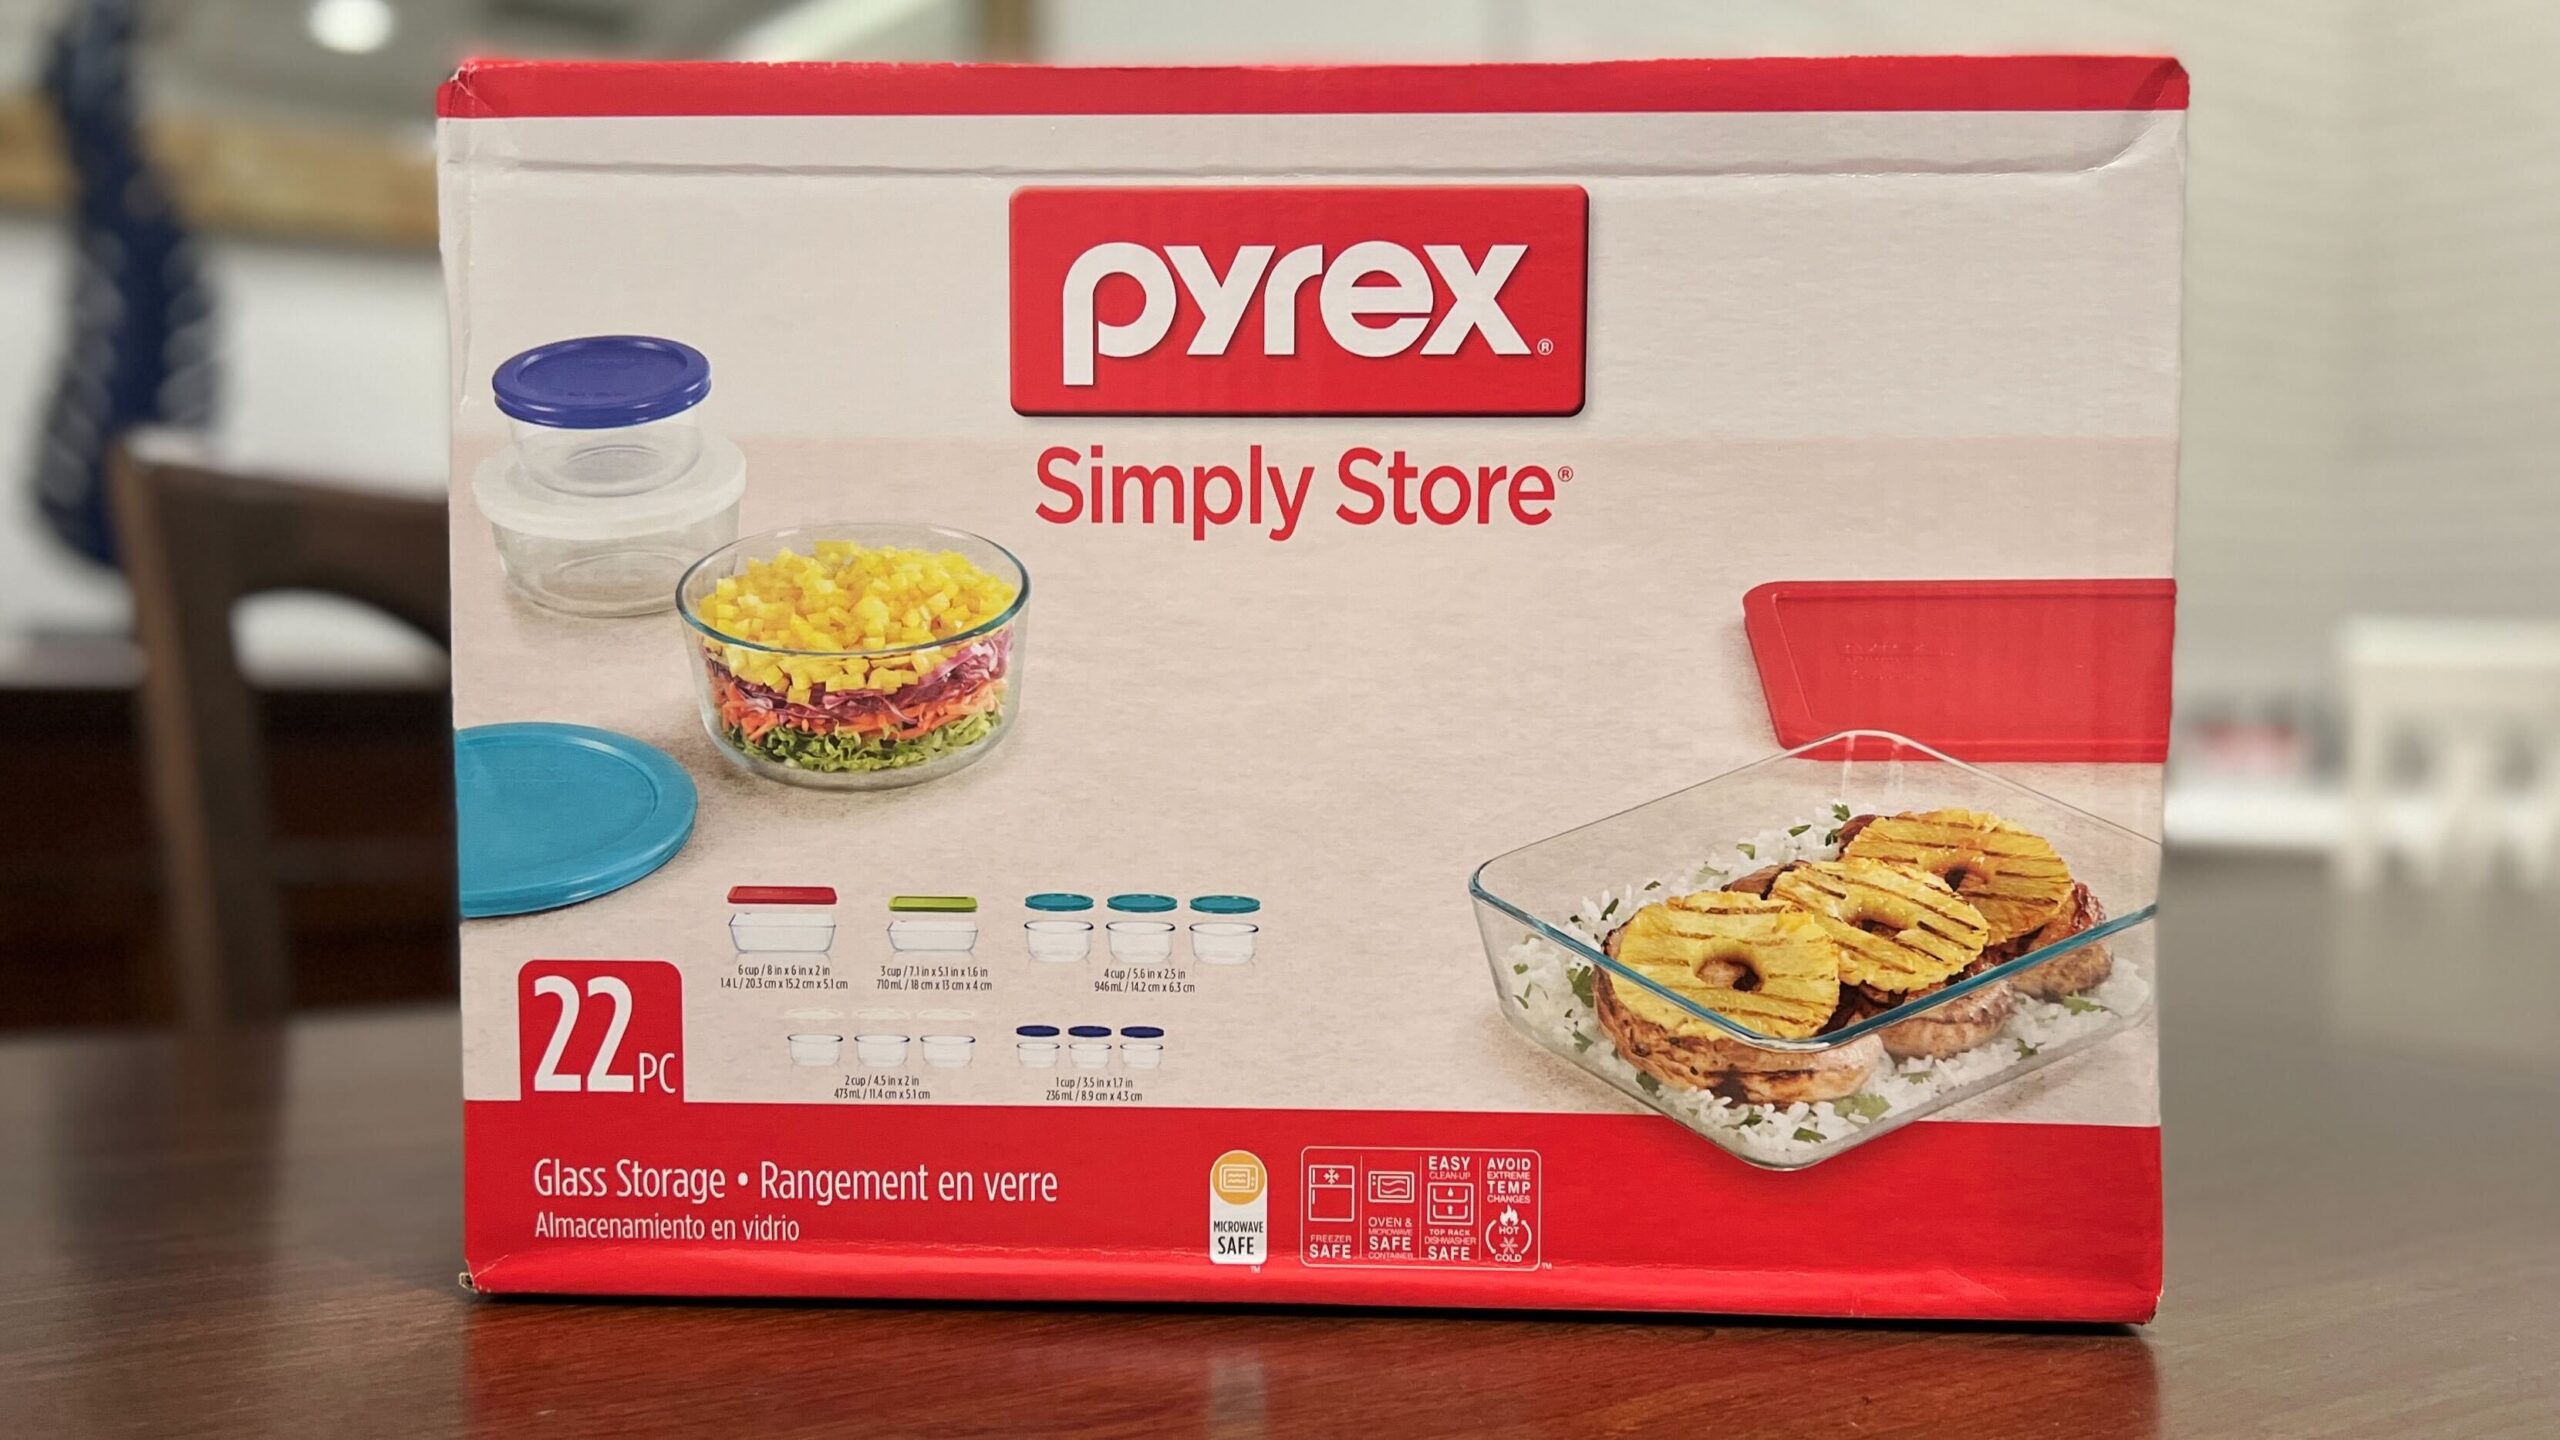 macy-s-pyrex-22pc-food-storage-container-sets-only-24-99-the